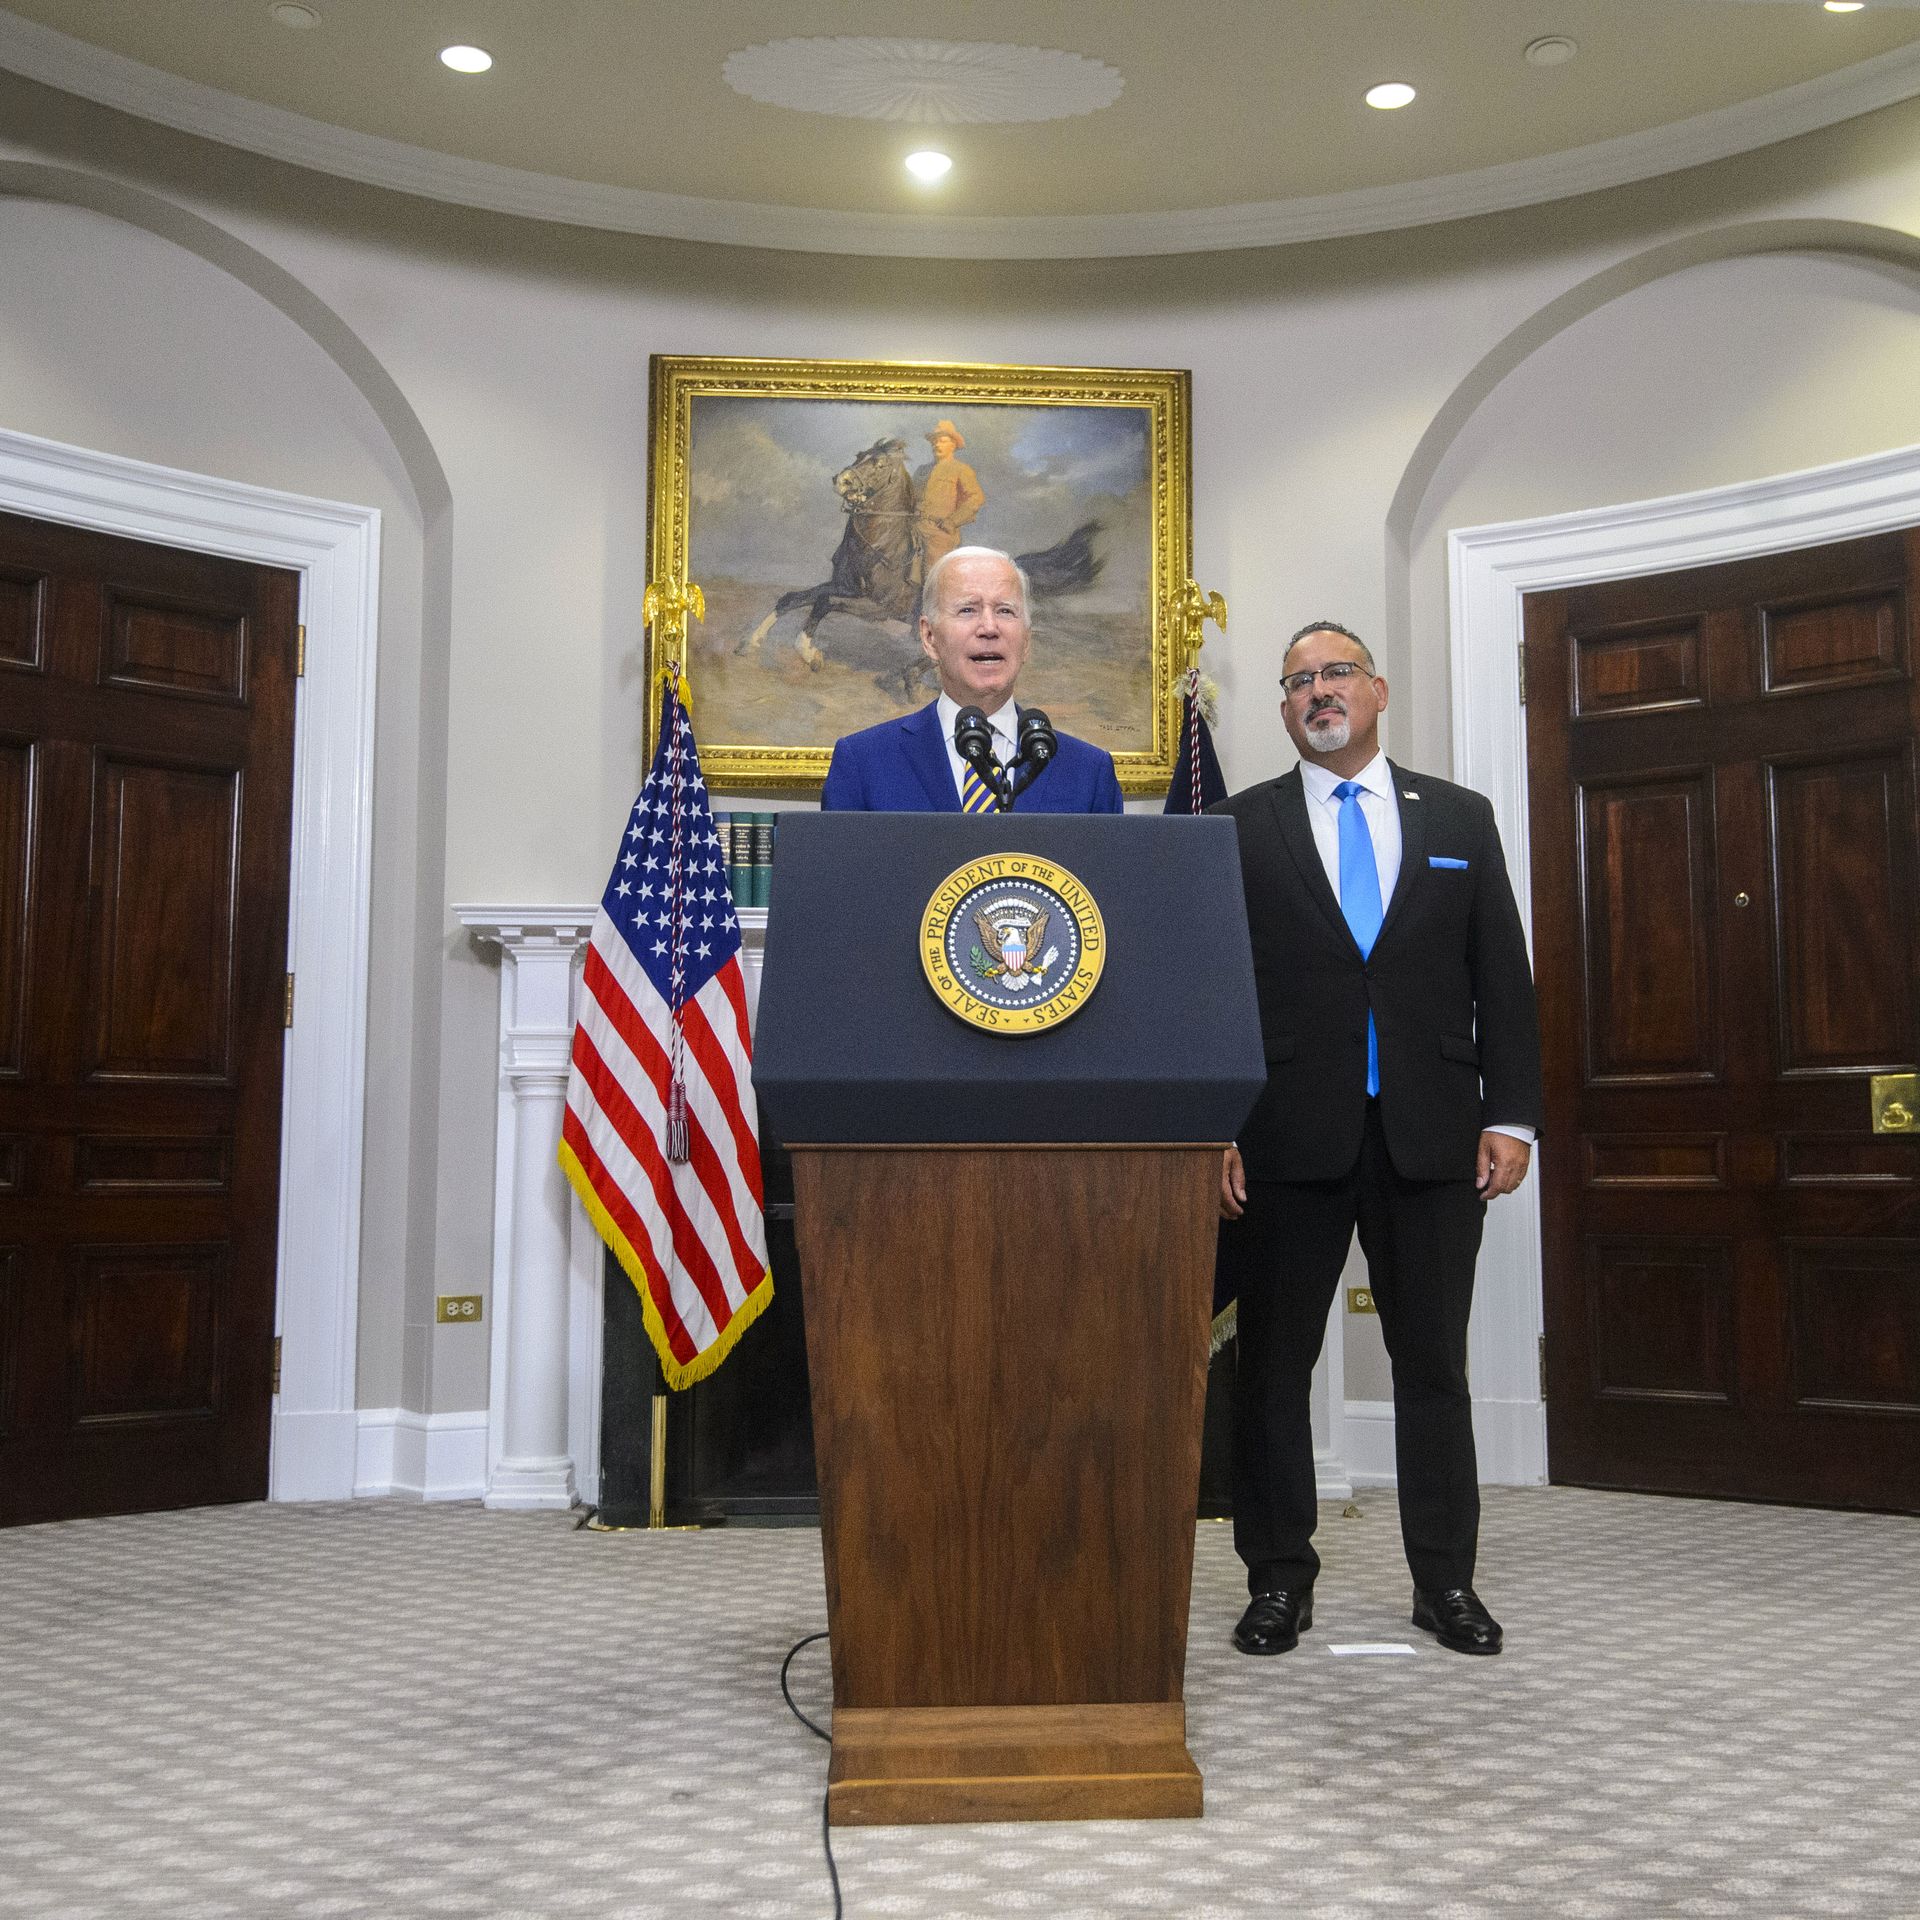 President Biden with Secretary of Education Miguel Cardona in the White House in August 2022.